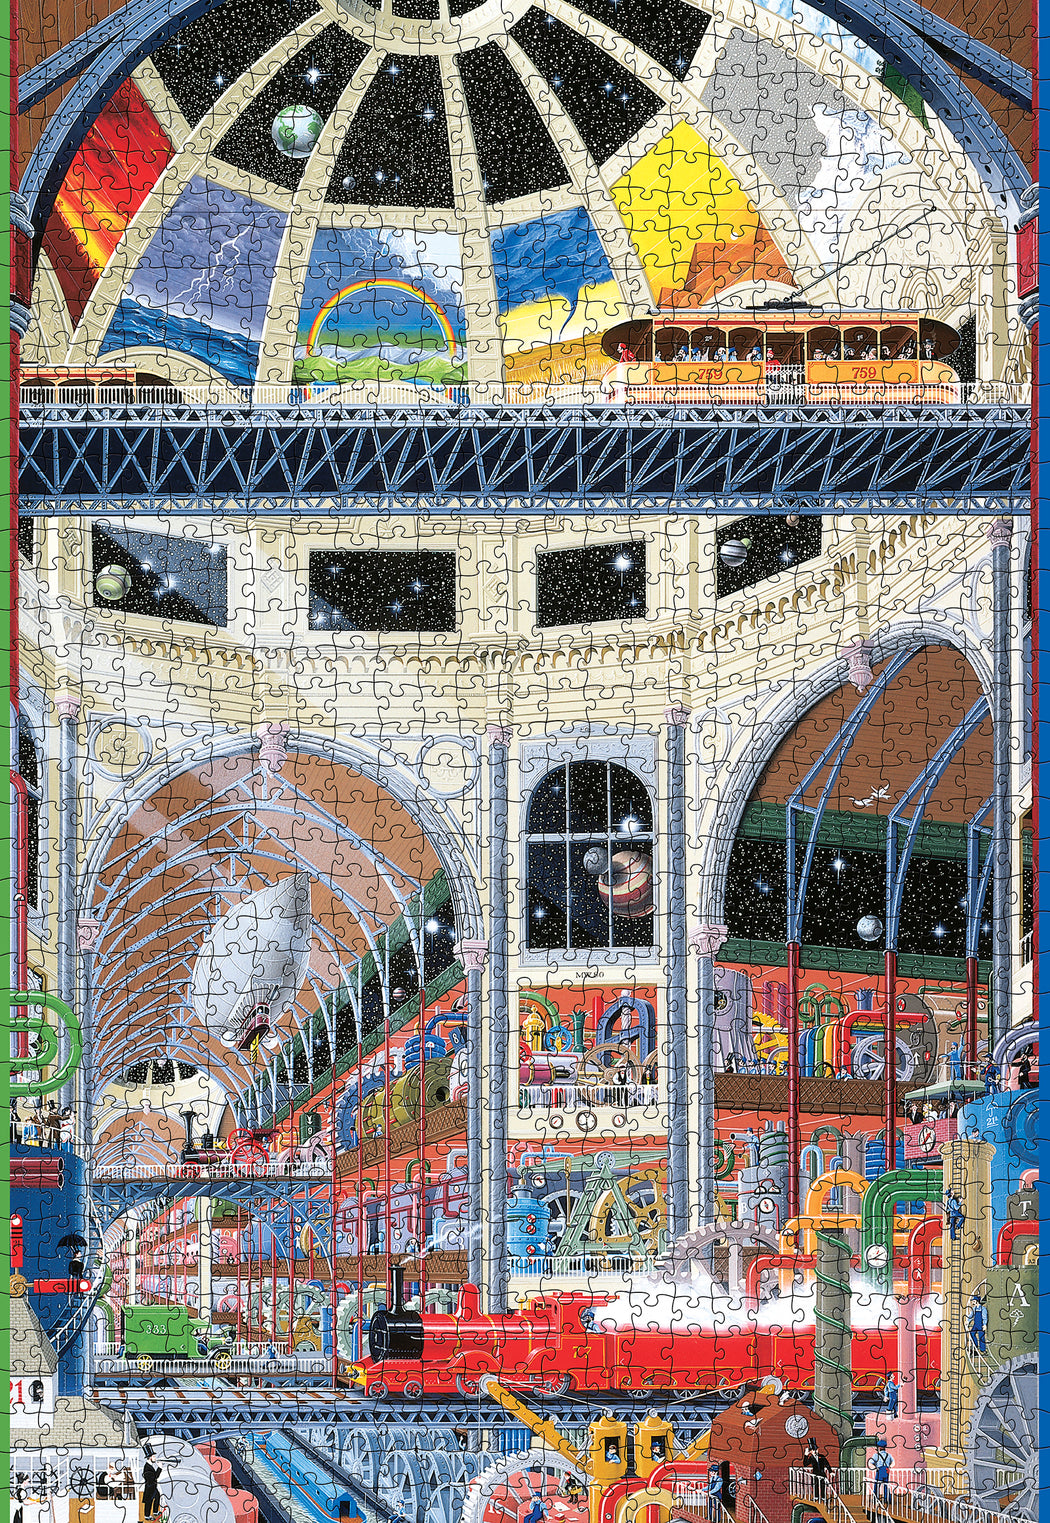 Mike Wilks: The Weather Works: The Grand Hall 1000-Piece Jigsaw Puzzle_Zoom